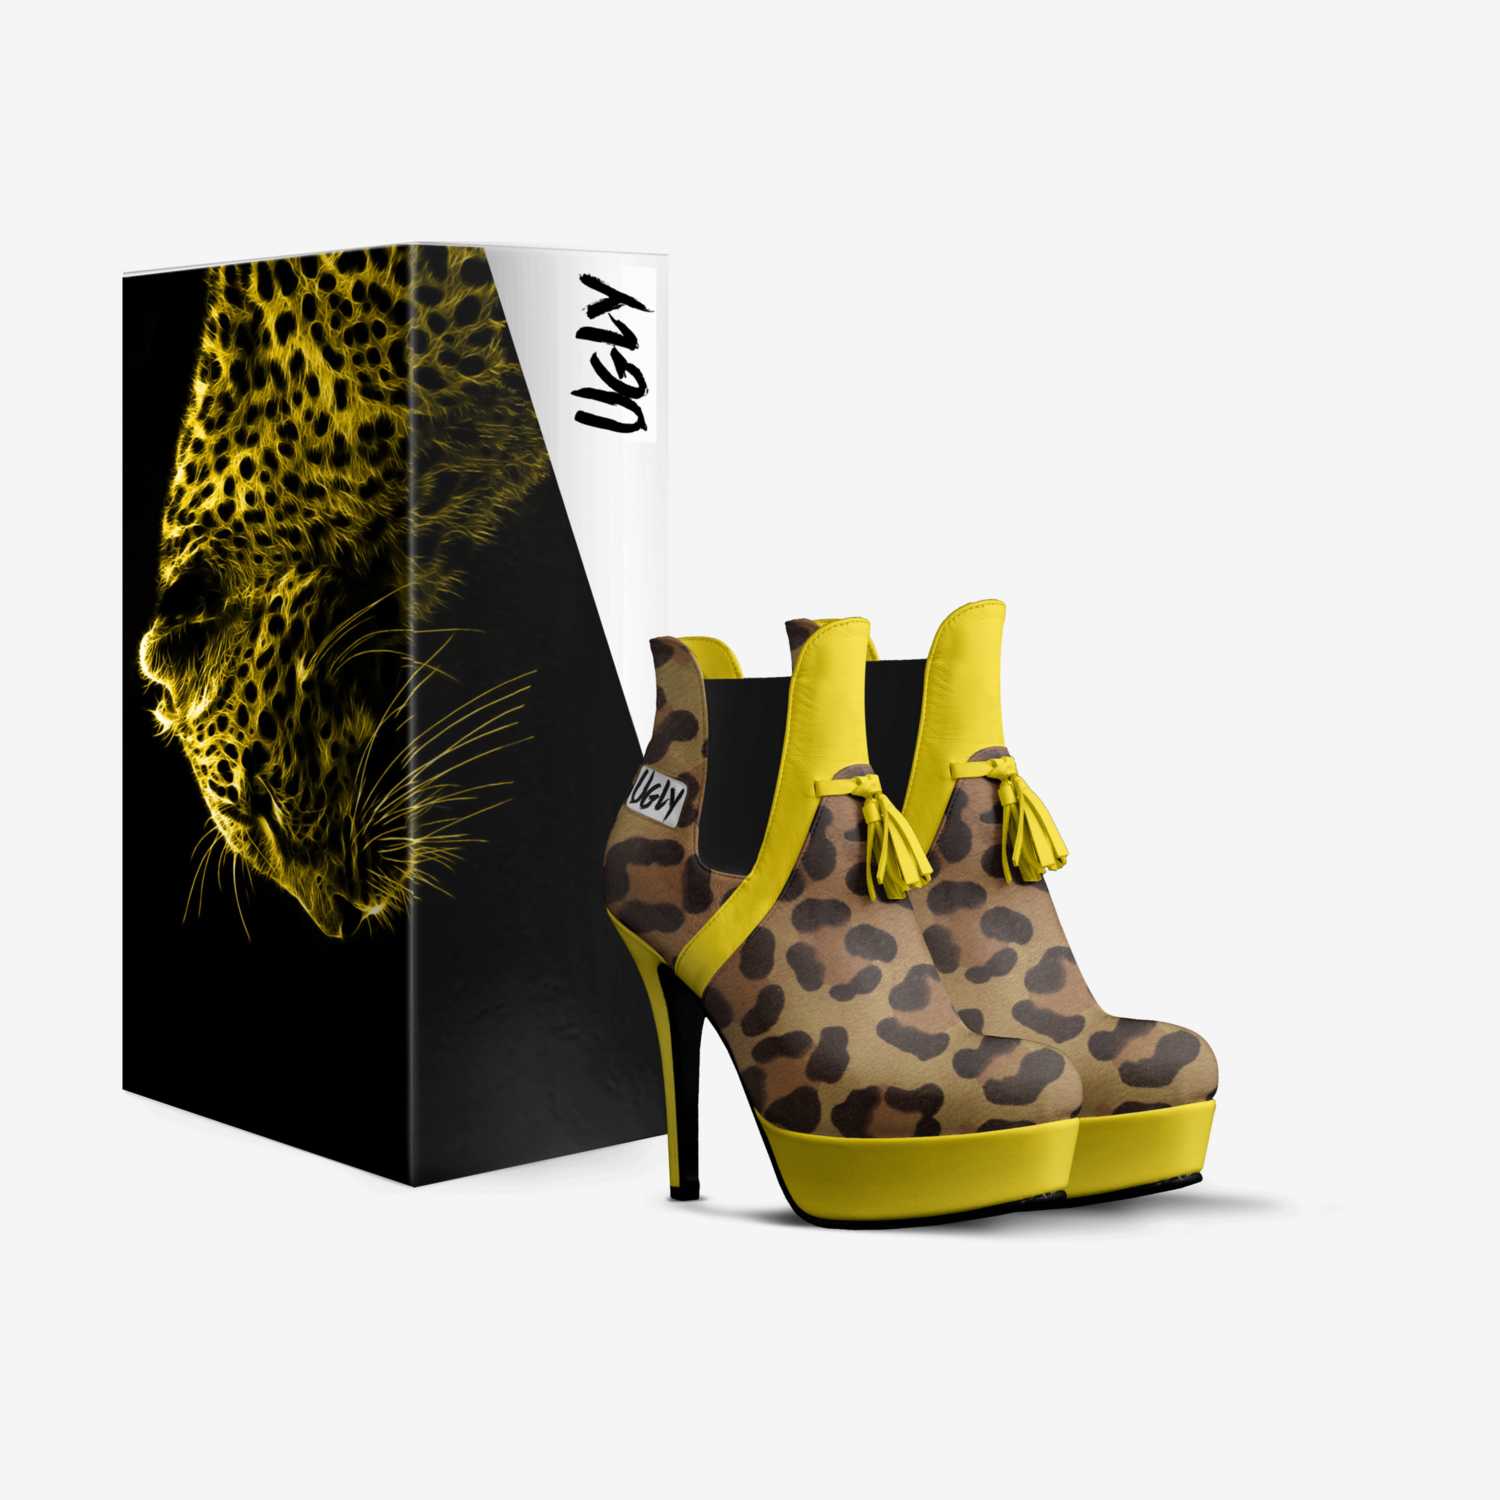 Spade custom made in Italy shoes by Ugly Bae | Box view